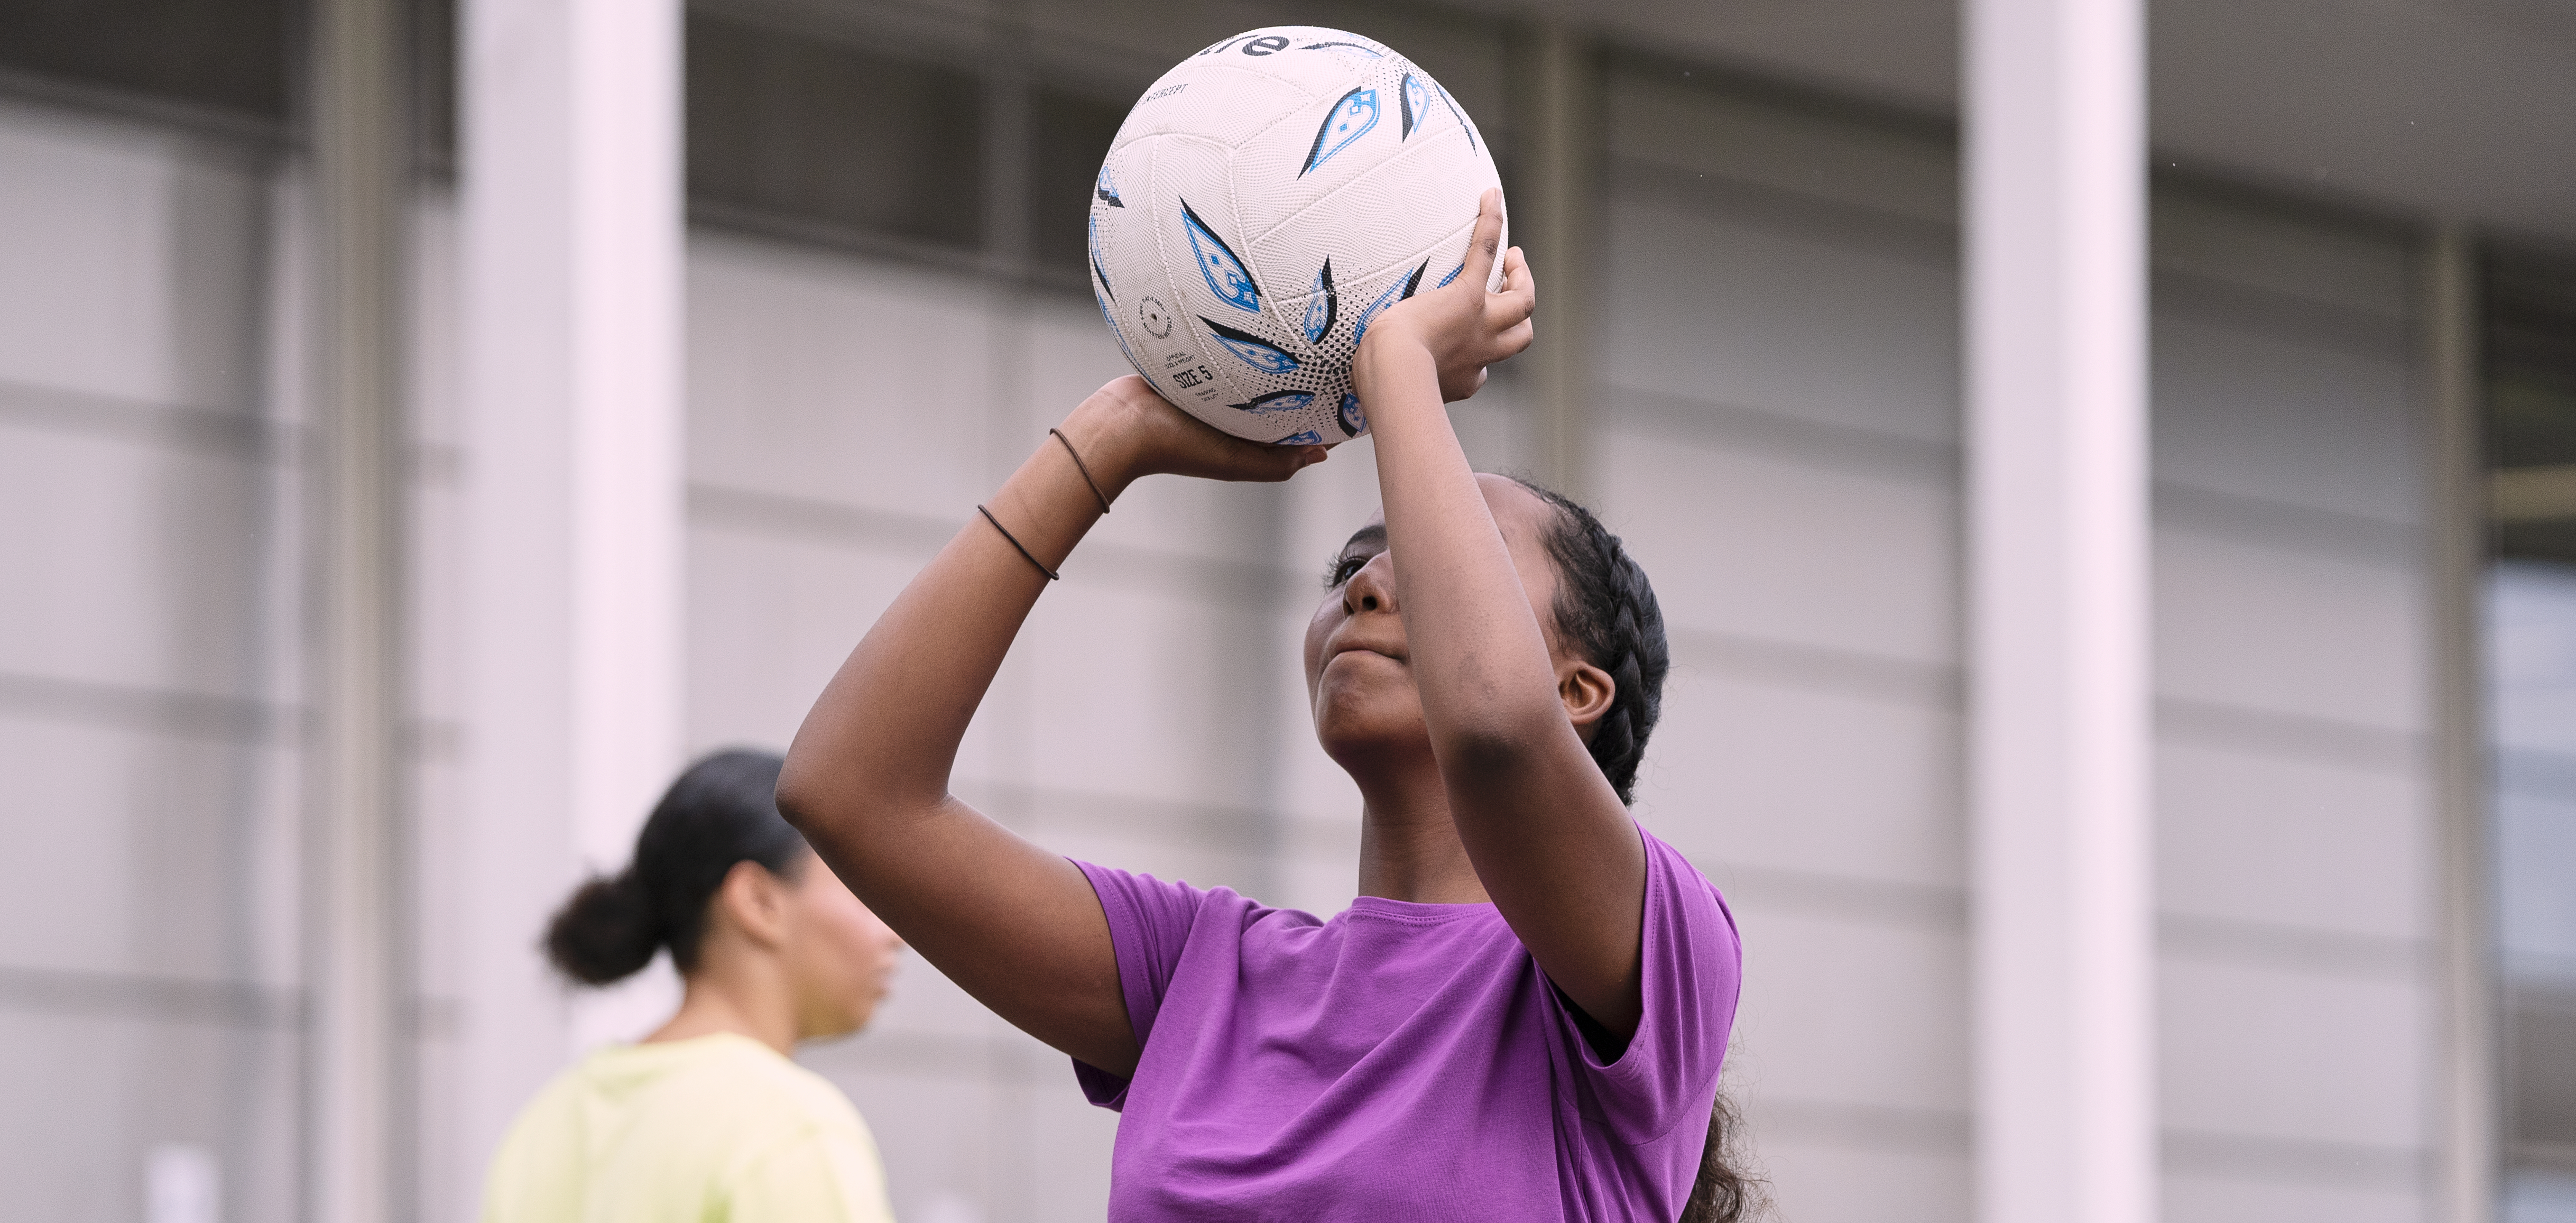 girl playing netball holding the ball above her head wearing a purple t shirt